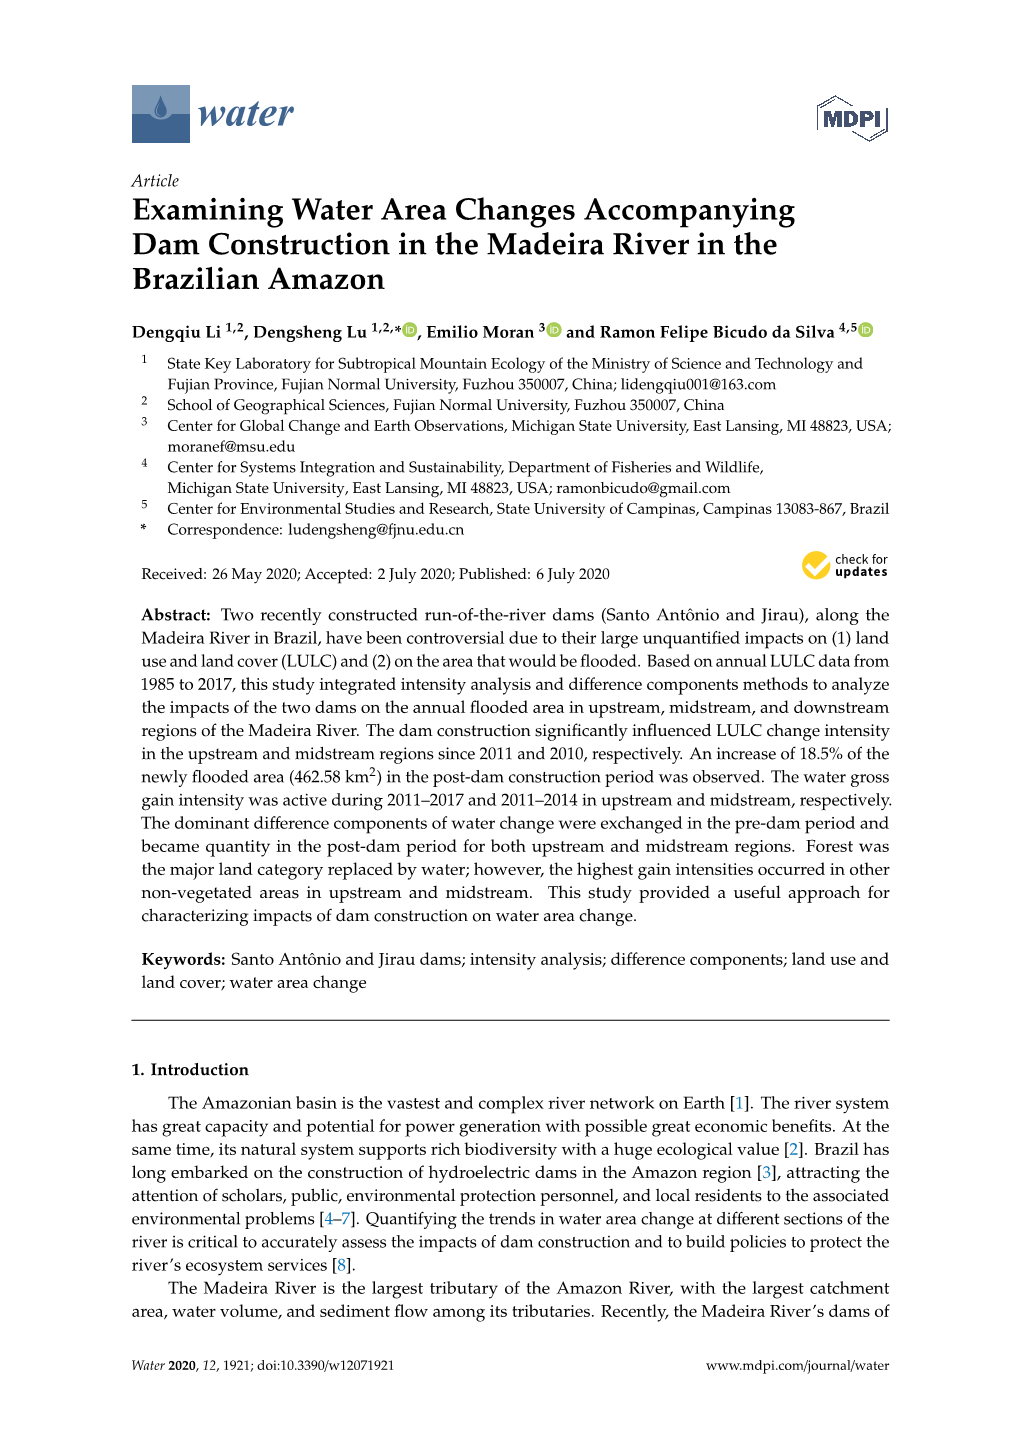 Examining Water Area Changes Accompanying Dam Construction in the Madeira River in the Brazilian Amazon